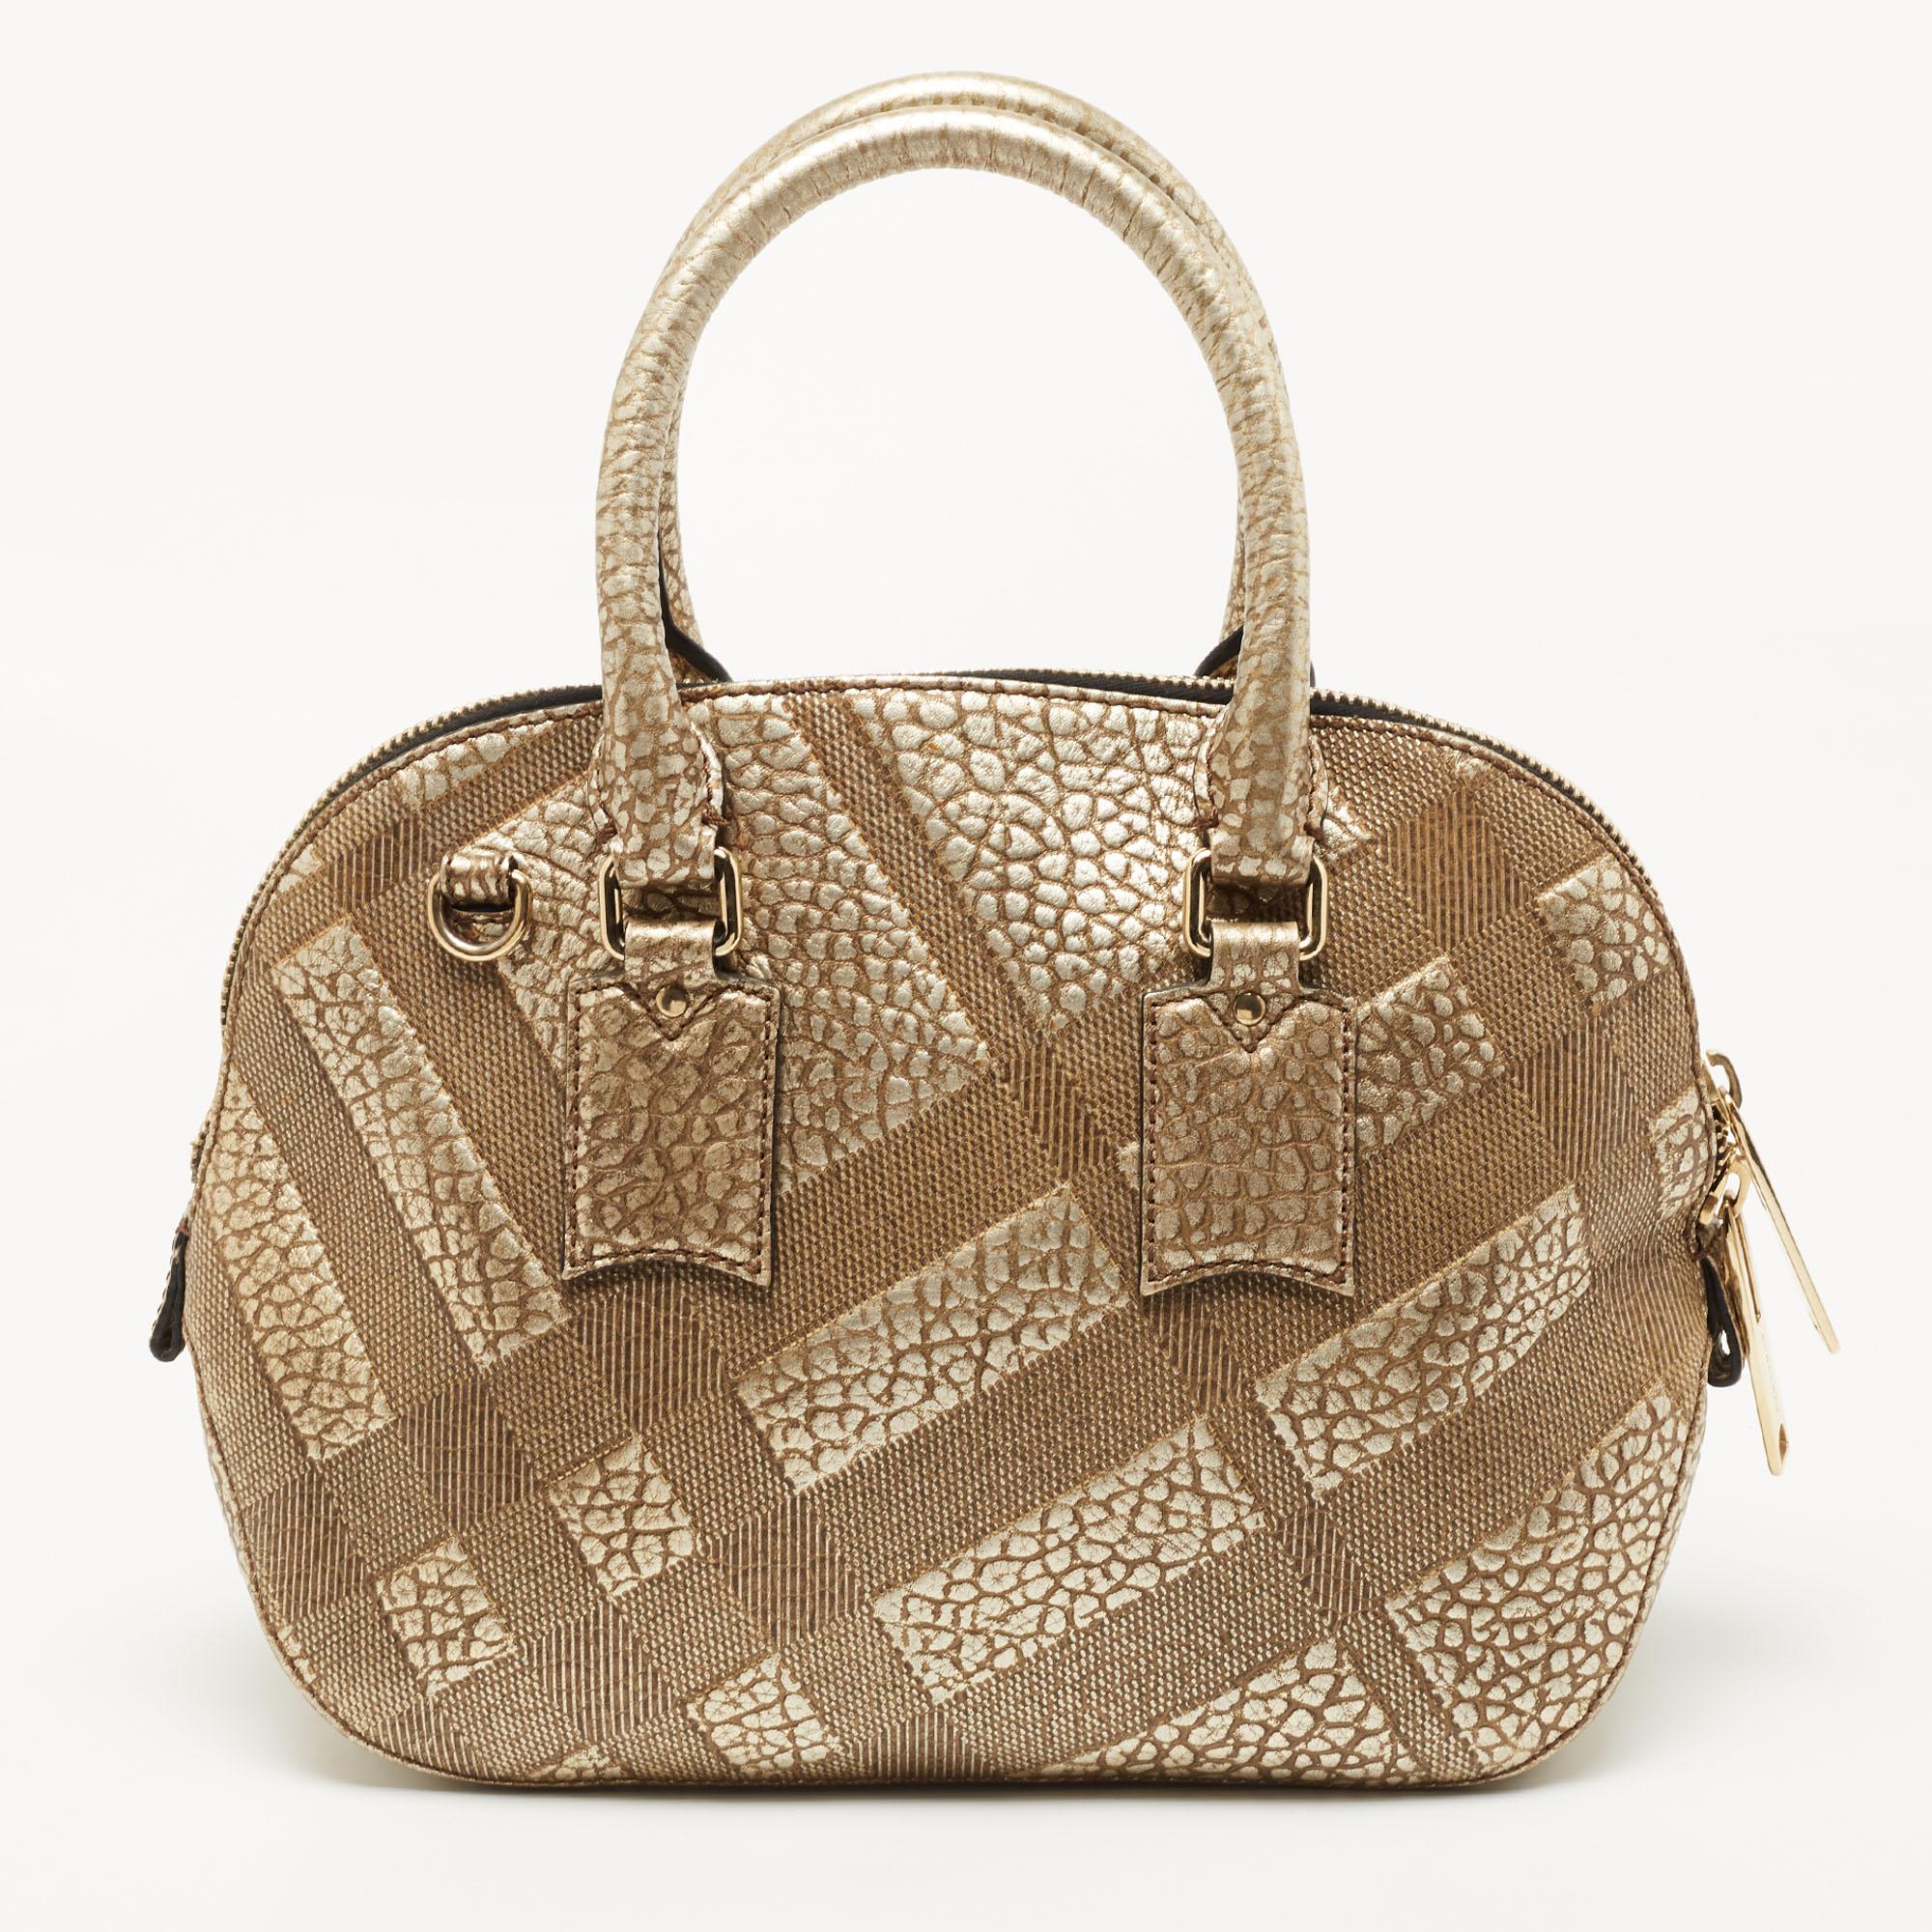 Expertly crafted and skillfully designed, this Burberry creation is a must-have in every bag collection. It is made from check-embossed leather. Features like the two comfortable handles, detachable shoulder strap, and spacious interior make it a